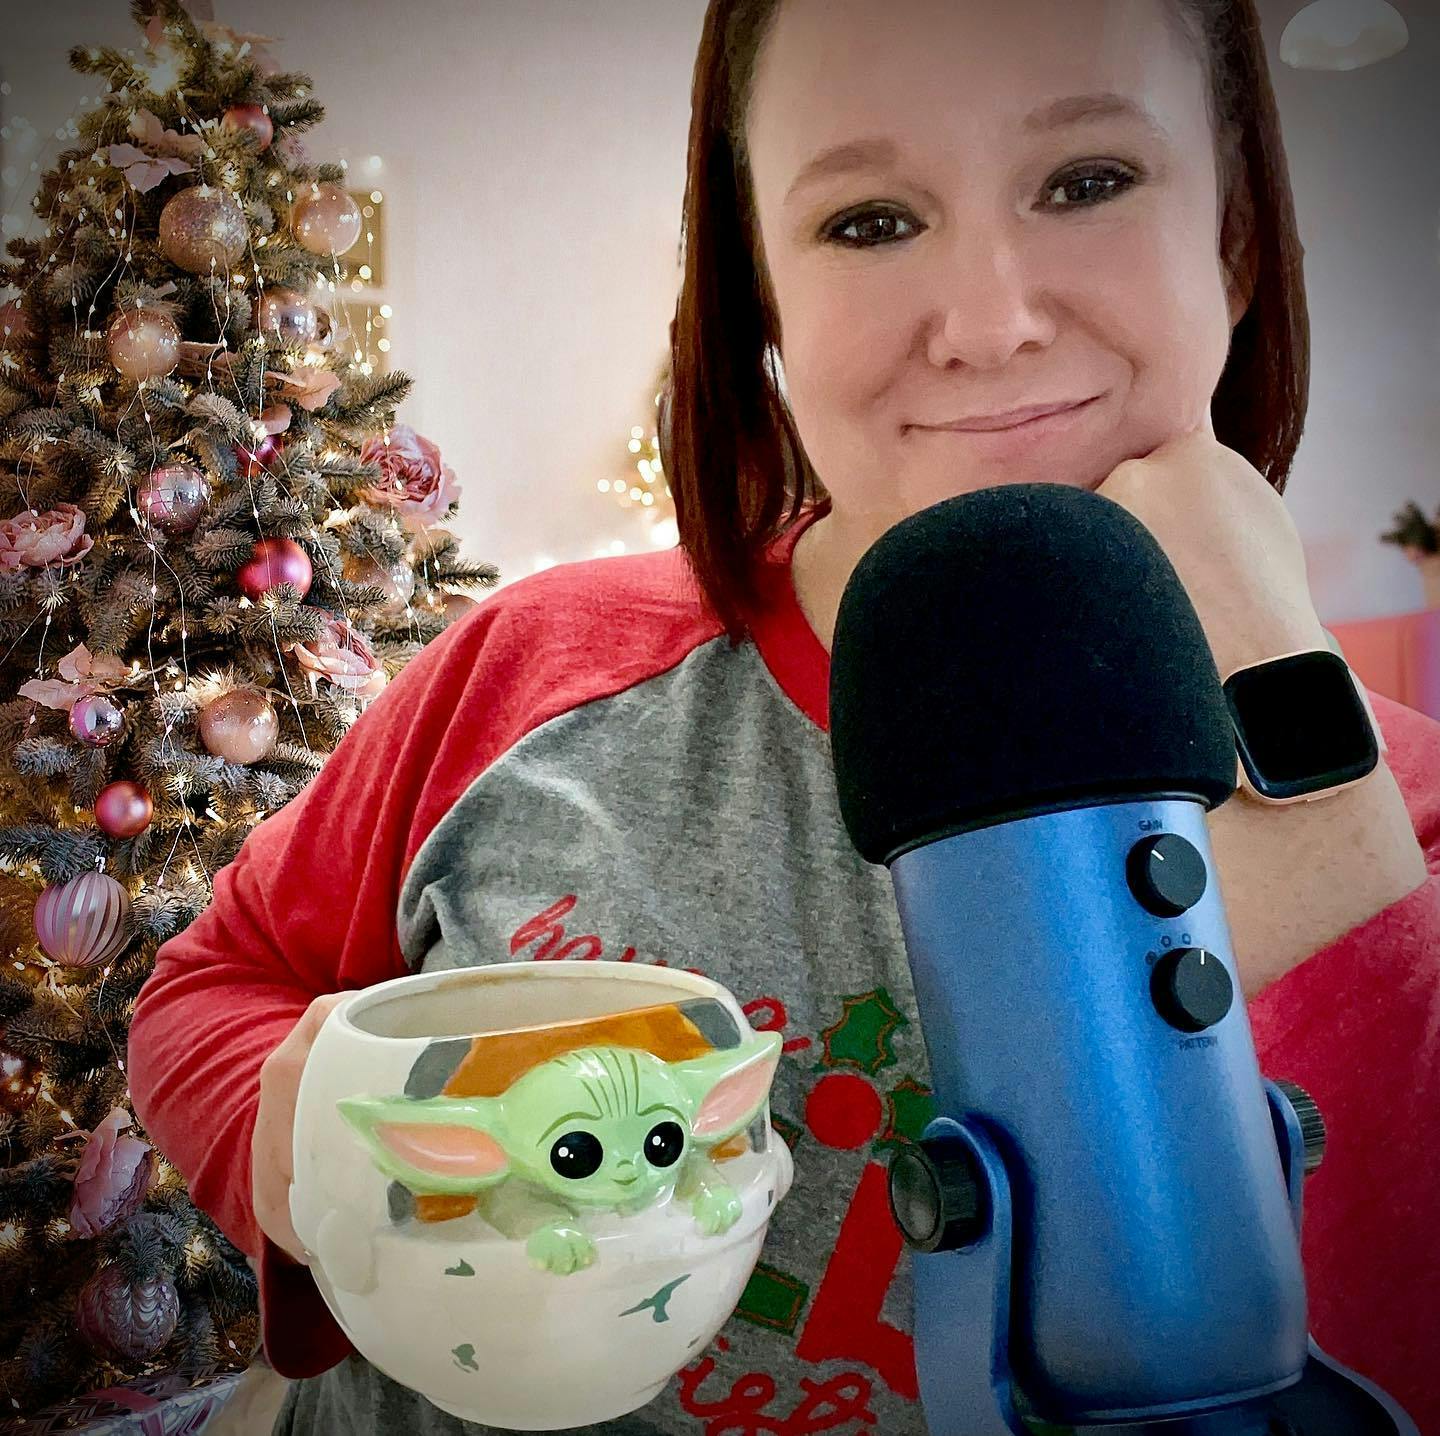 Today was podcasting day with @averylanecreations !! 

We had an awesome time recording AND we have some really awesome episodes coming up, including an interview that you won’t want to miss!! 

Next episode drops 12/27. Tap this photo for a reminder so you don’t miss it! 

Link is in bio if wanna catch up on what you’ve missed so far. ❤️ 

How did you spend your weekend?

#hypnoticyarn #podcastday #podcastrecording #smallbusinesslife #makersgonnasell #handmadebusiness #handmadebusinesslove #yarndying #indiedyer #subscriptionbox